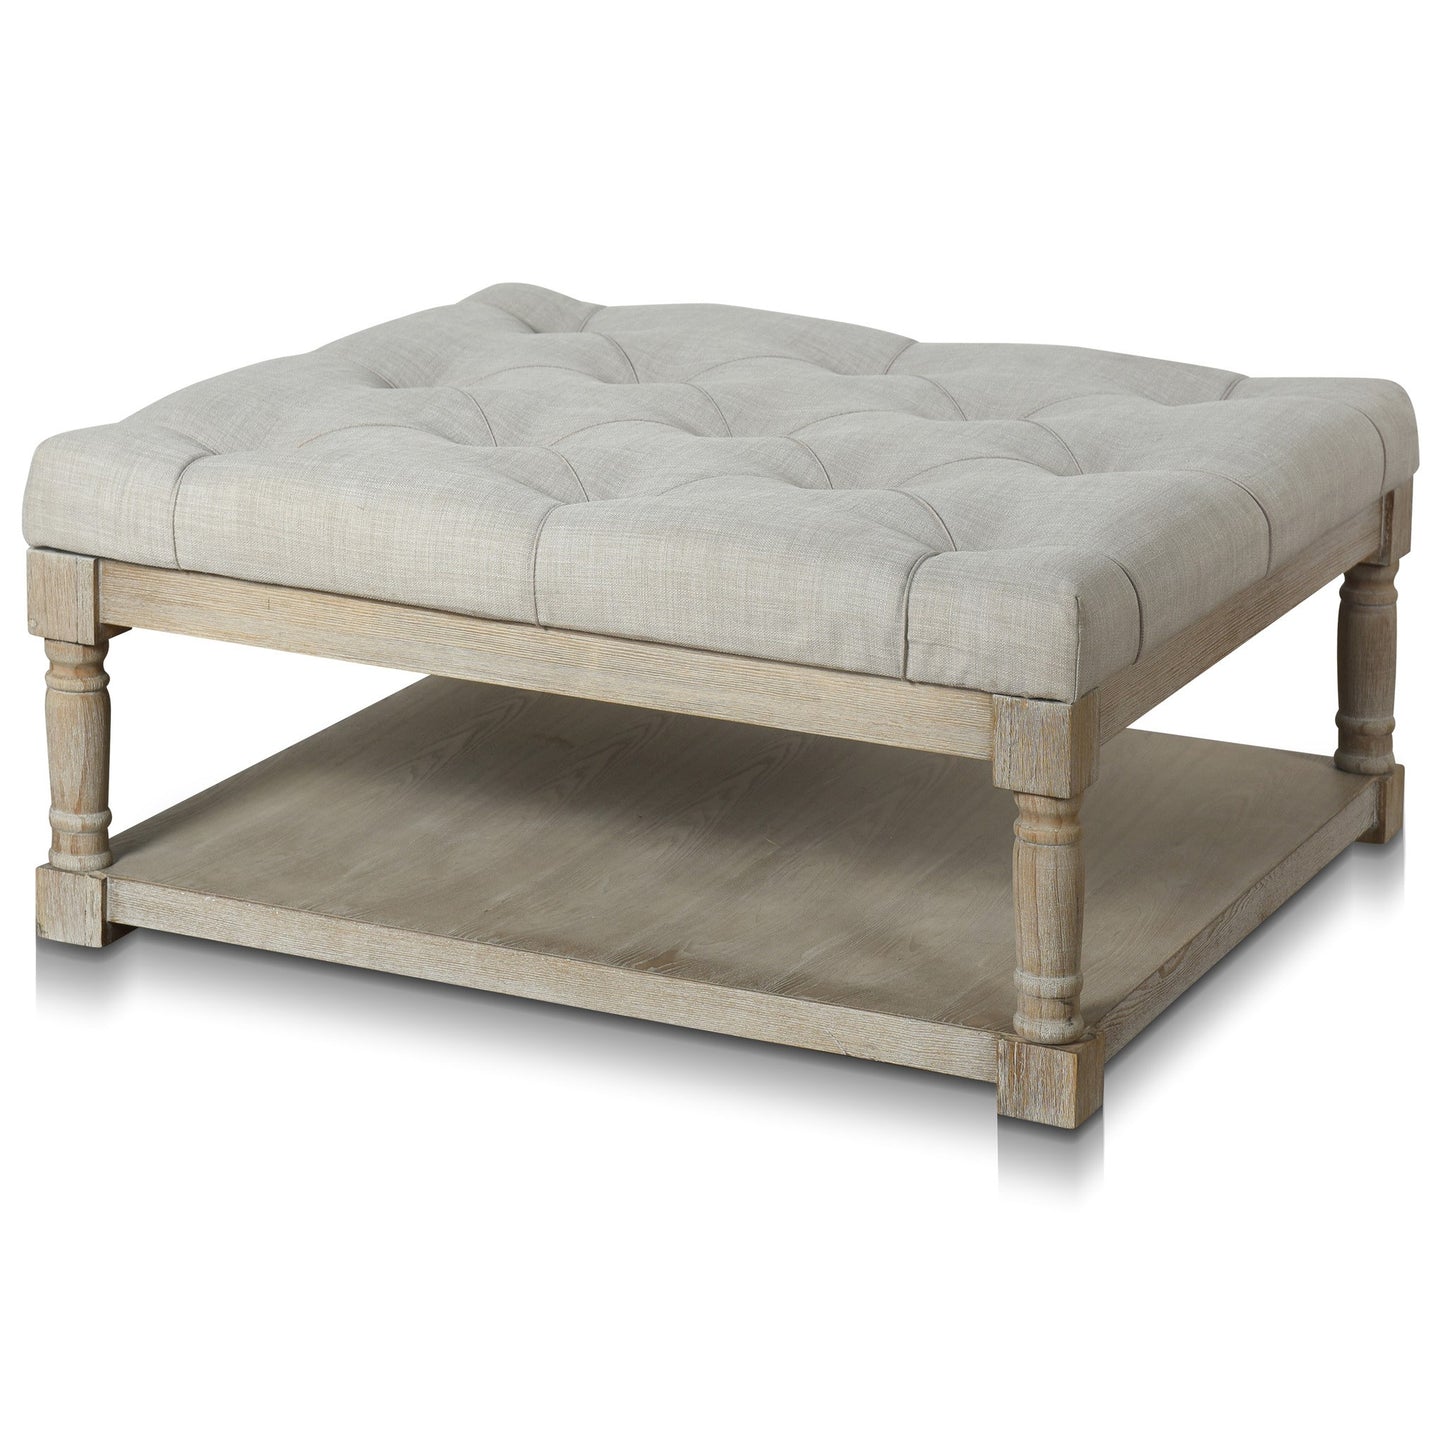 Tufted Coffee Table Ottoman